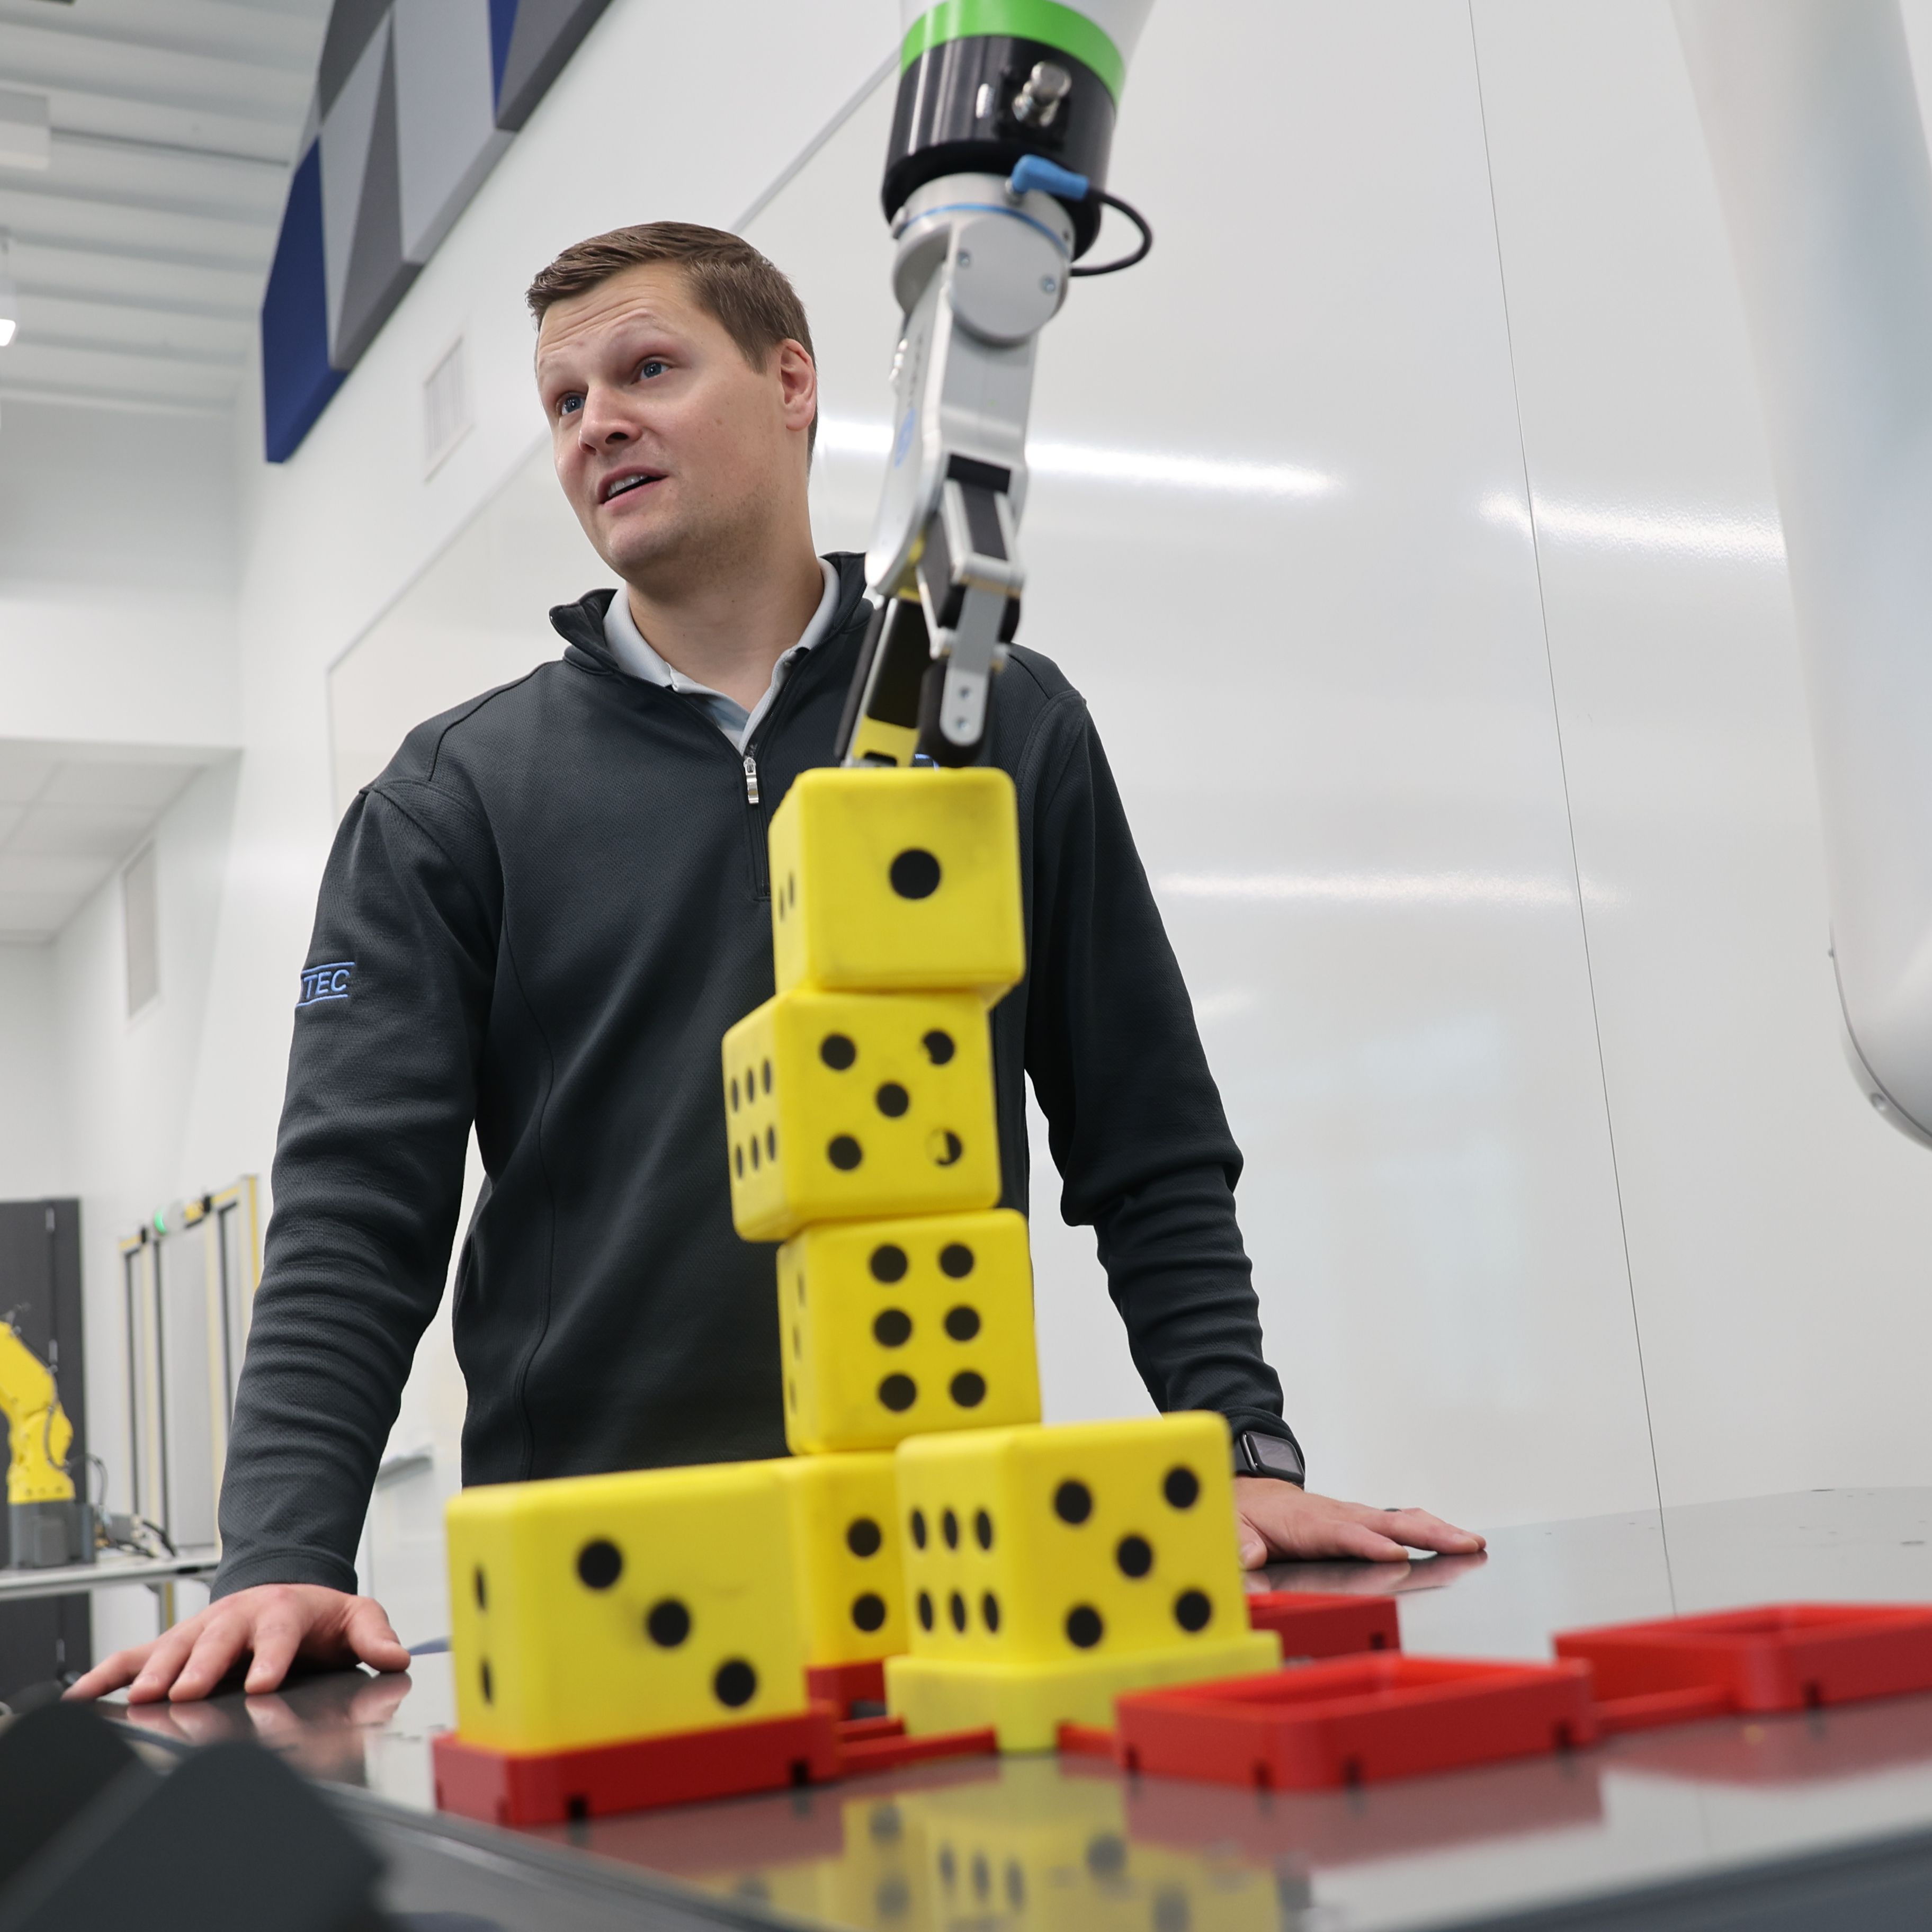 A White male models how a robotic arm can pick up a stack of yellow, foam dice